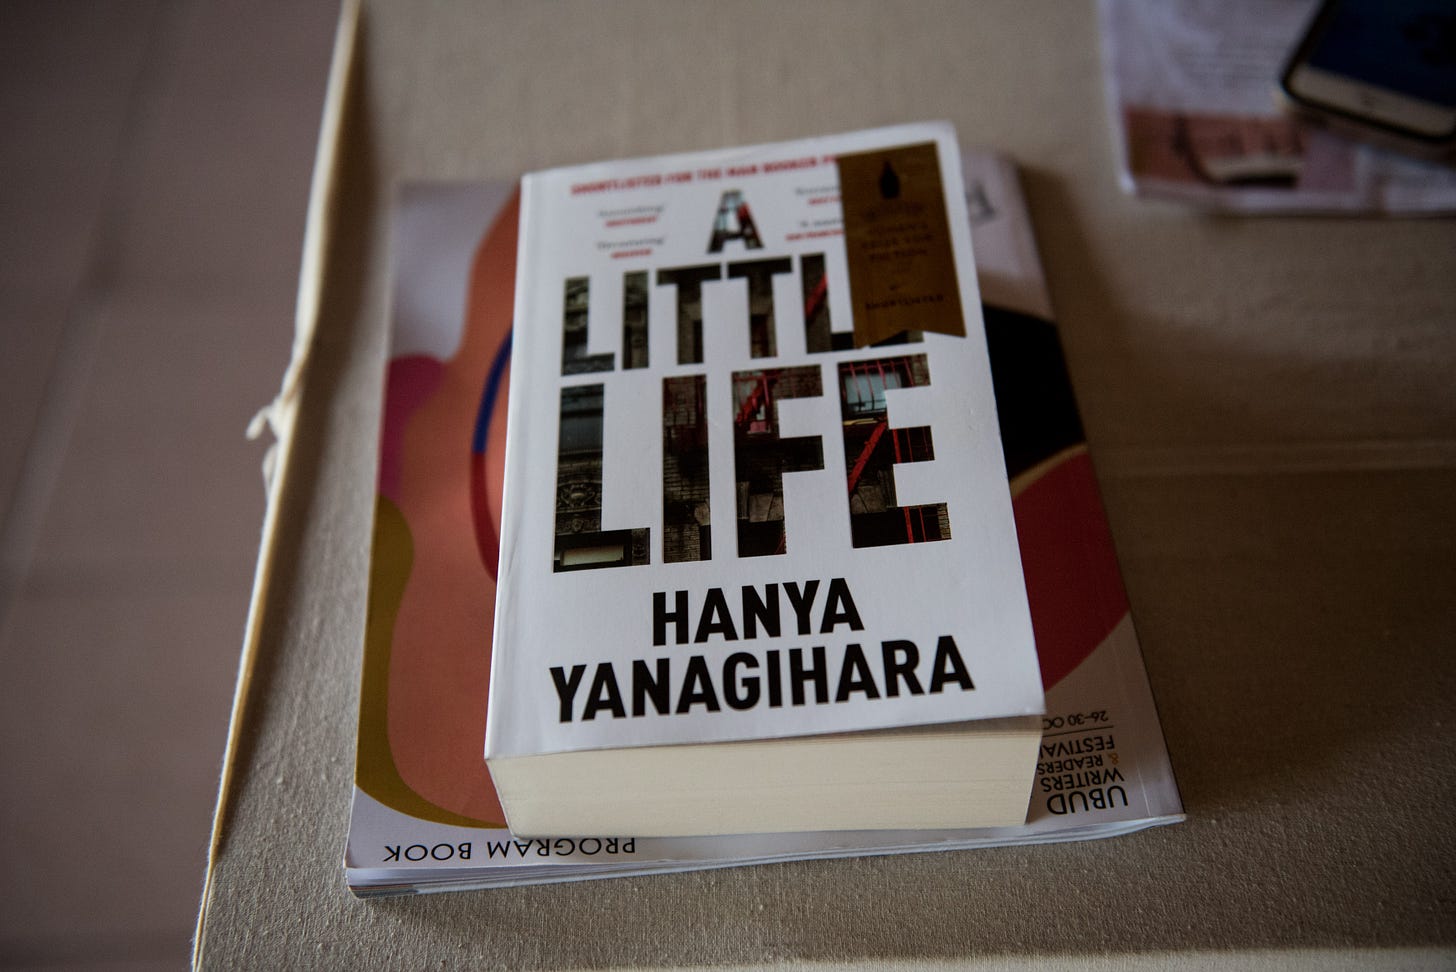 The book "A Little Life" by Hanya Yanagihara pictured lying on top of a magazine